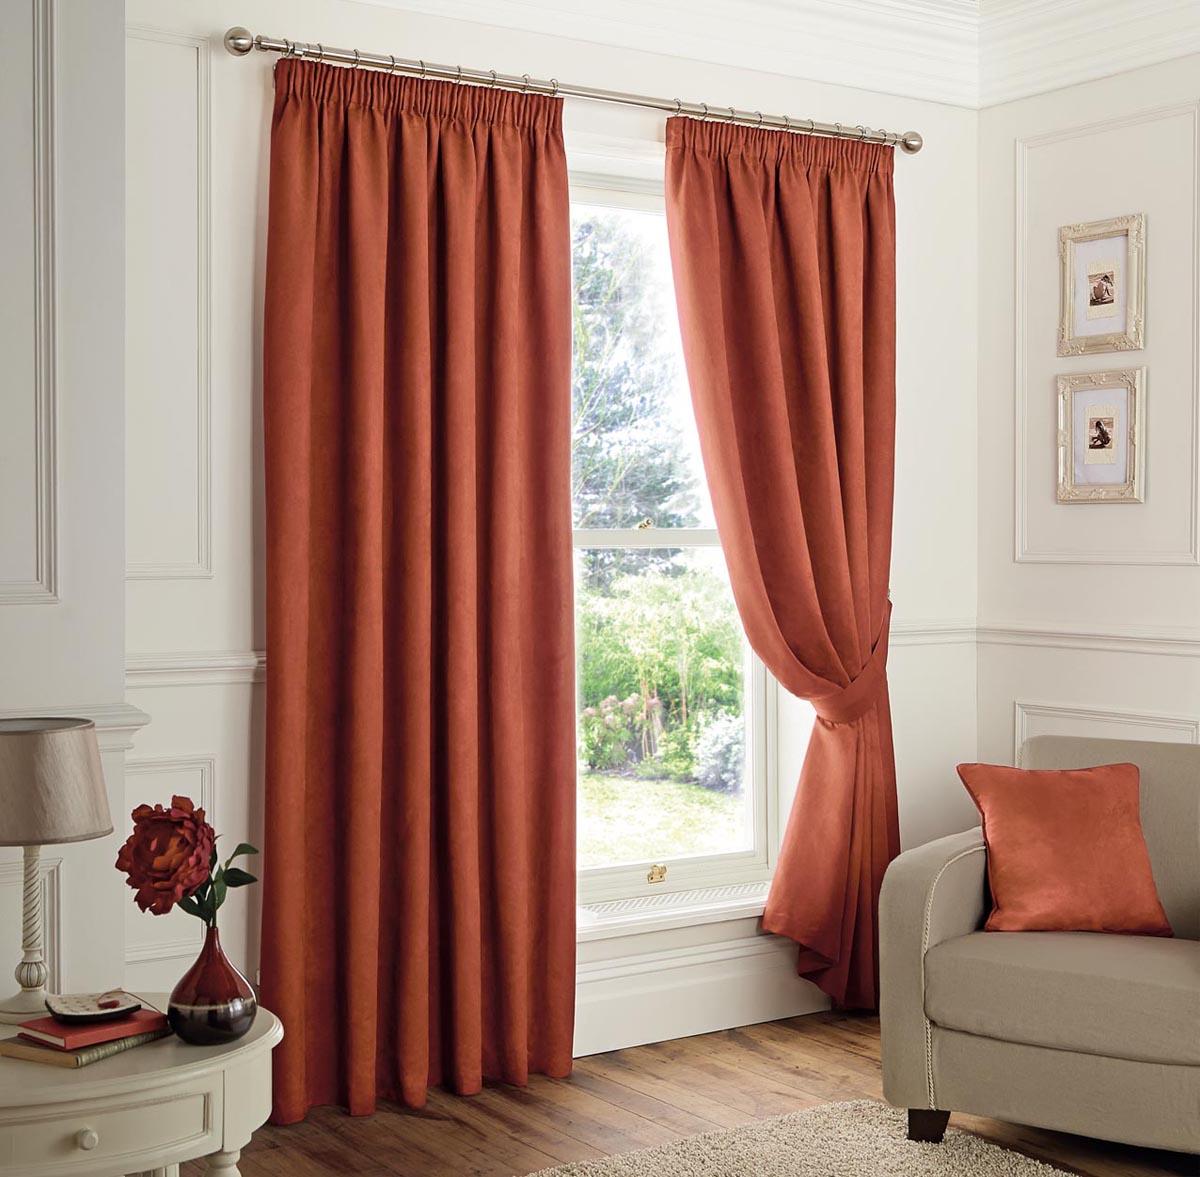 Outdoor Bamboo Curtain Panels Fake Suede Curtains